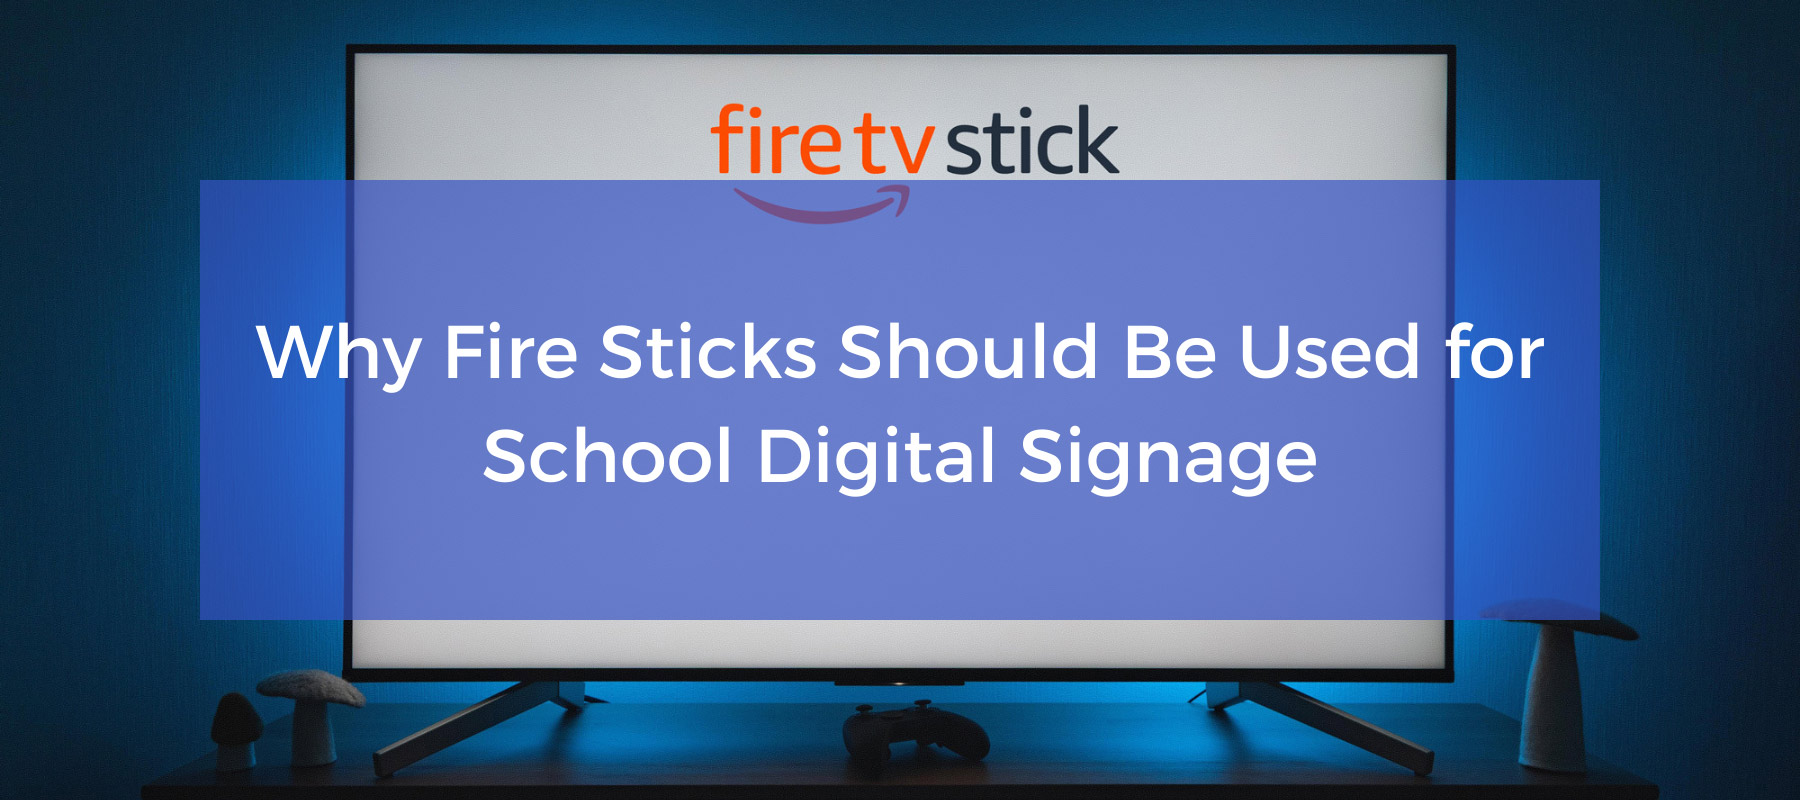 Why Fire Sticks Should Be Used for School Digital Signage